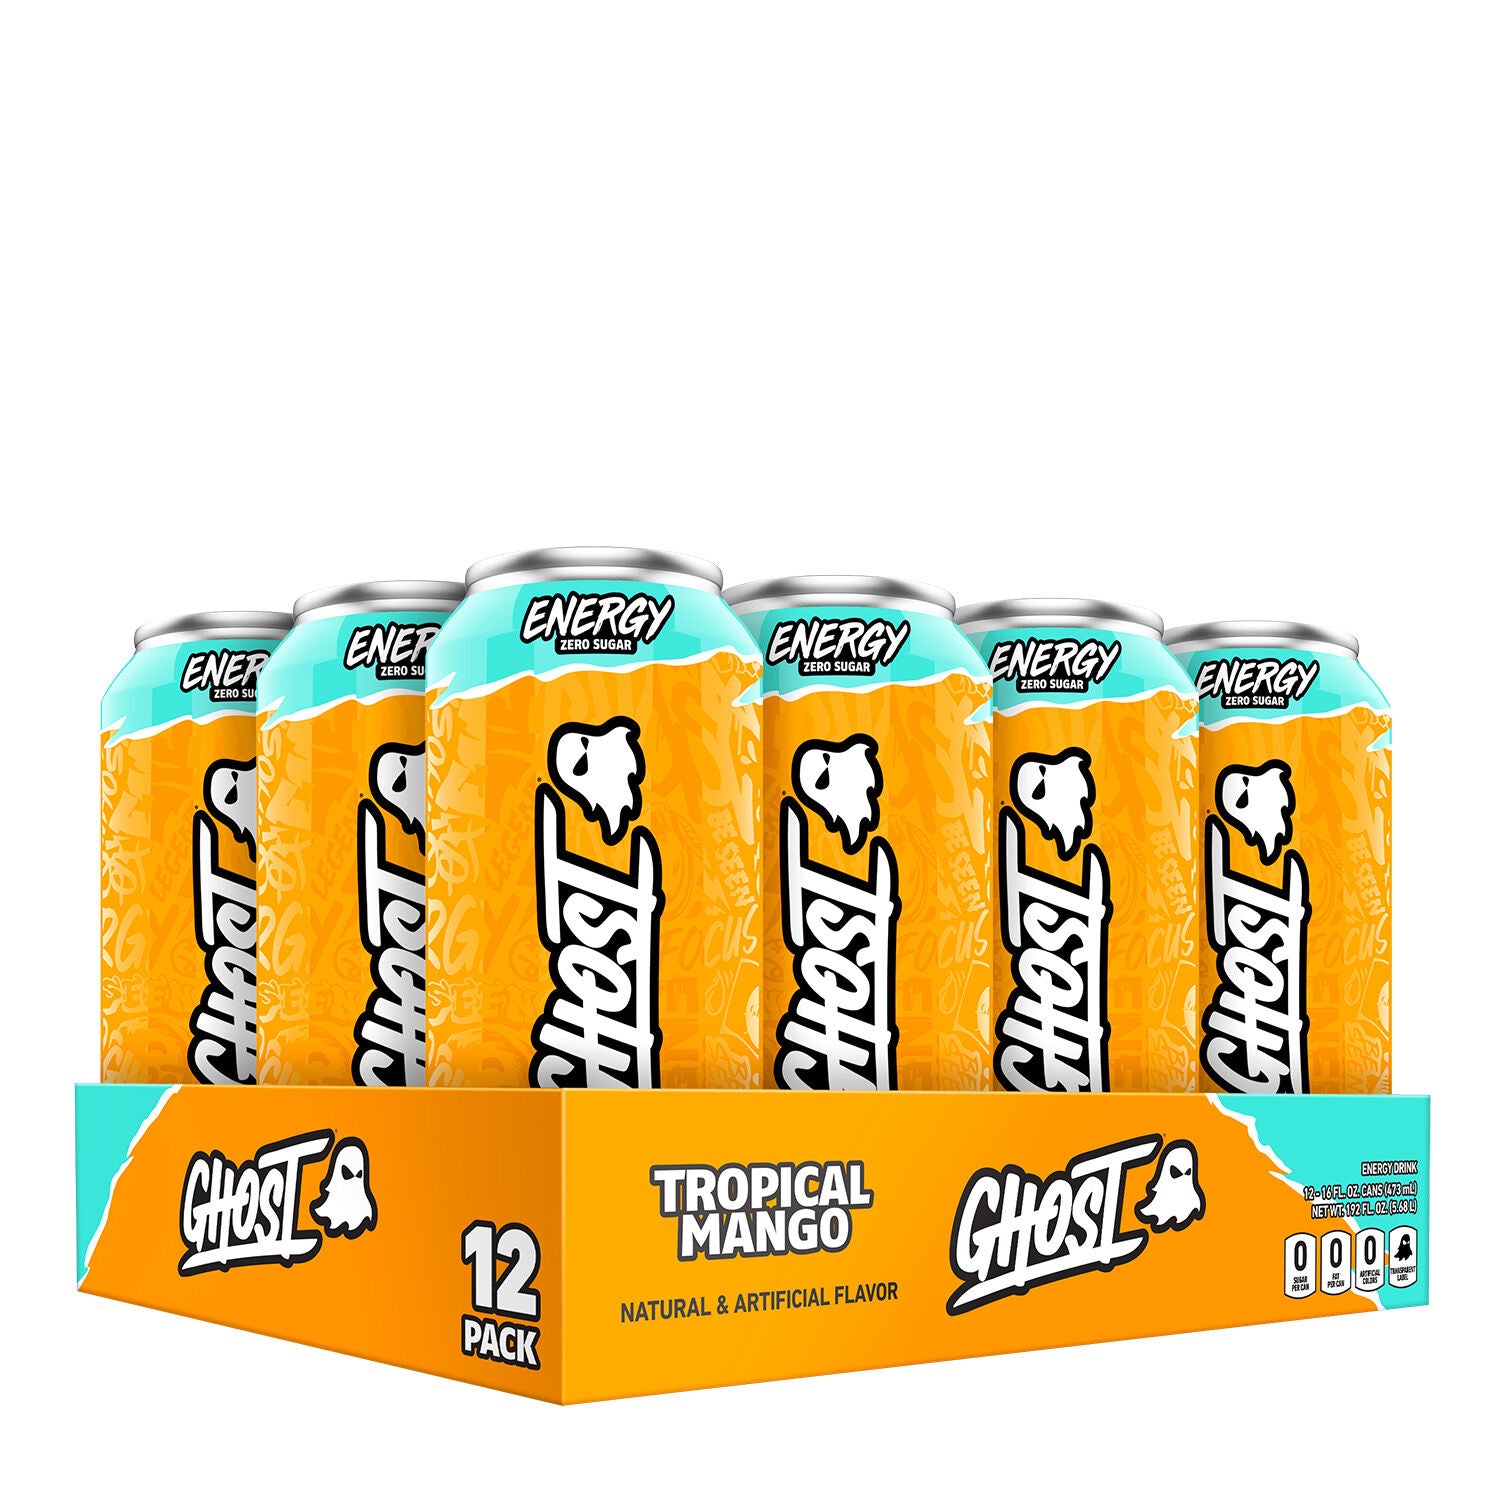 GHOST Energy Drink (1 case of 12 cans) Protein Snacks Tropical Mango GHOST ghost-energy-drink-1-case-of-12-cans